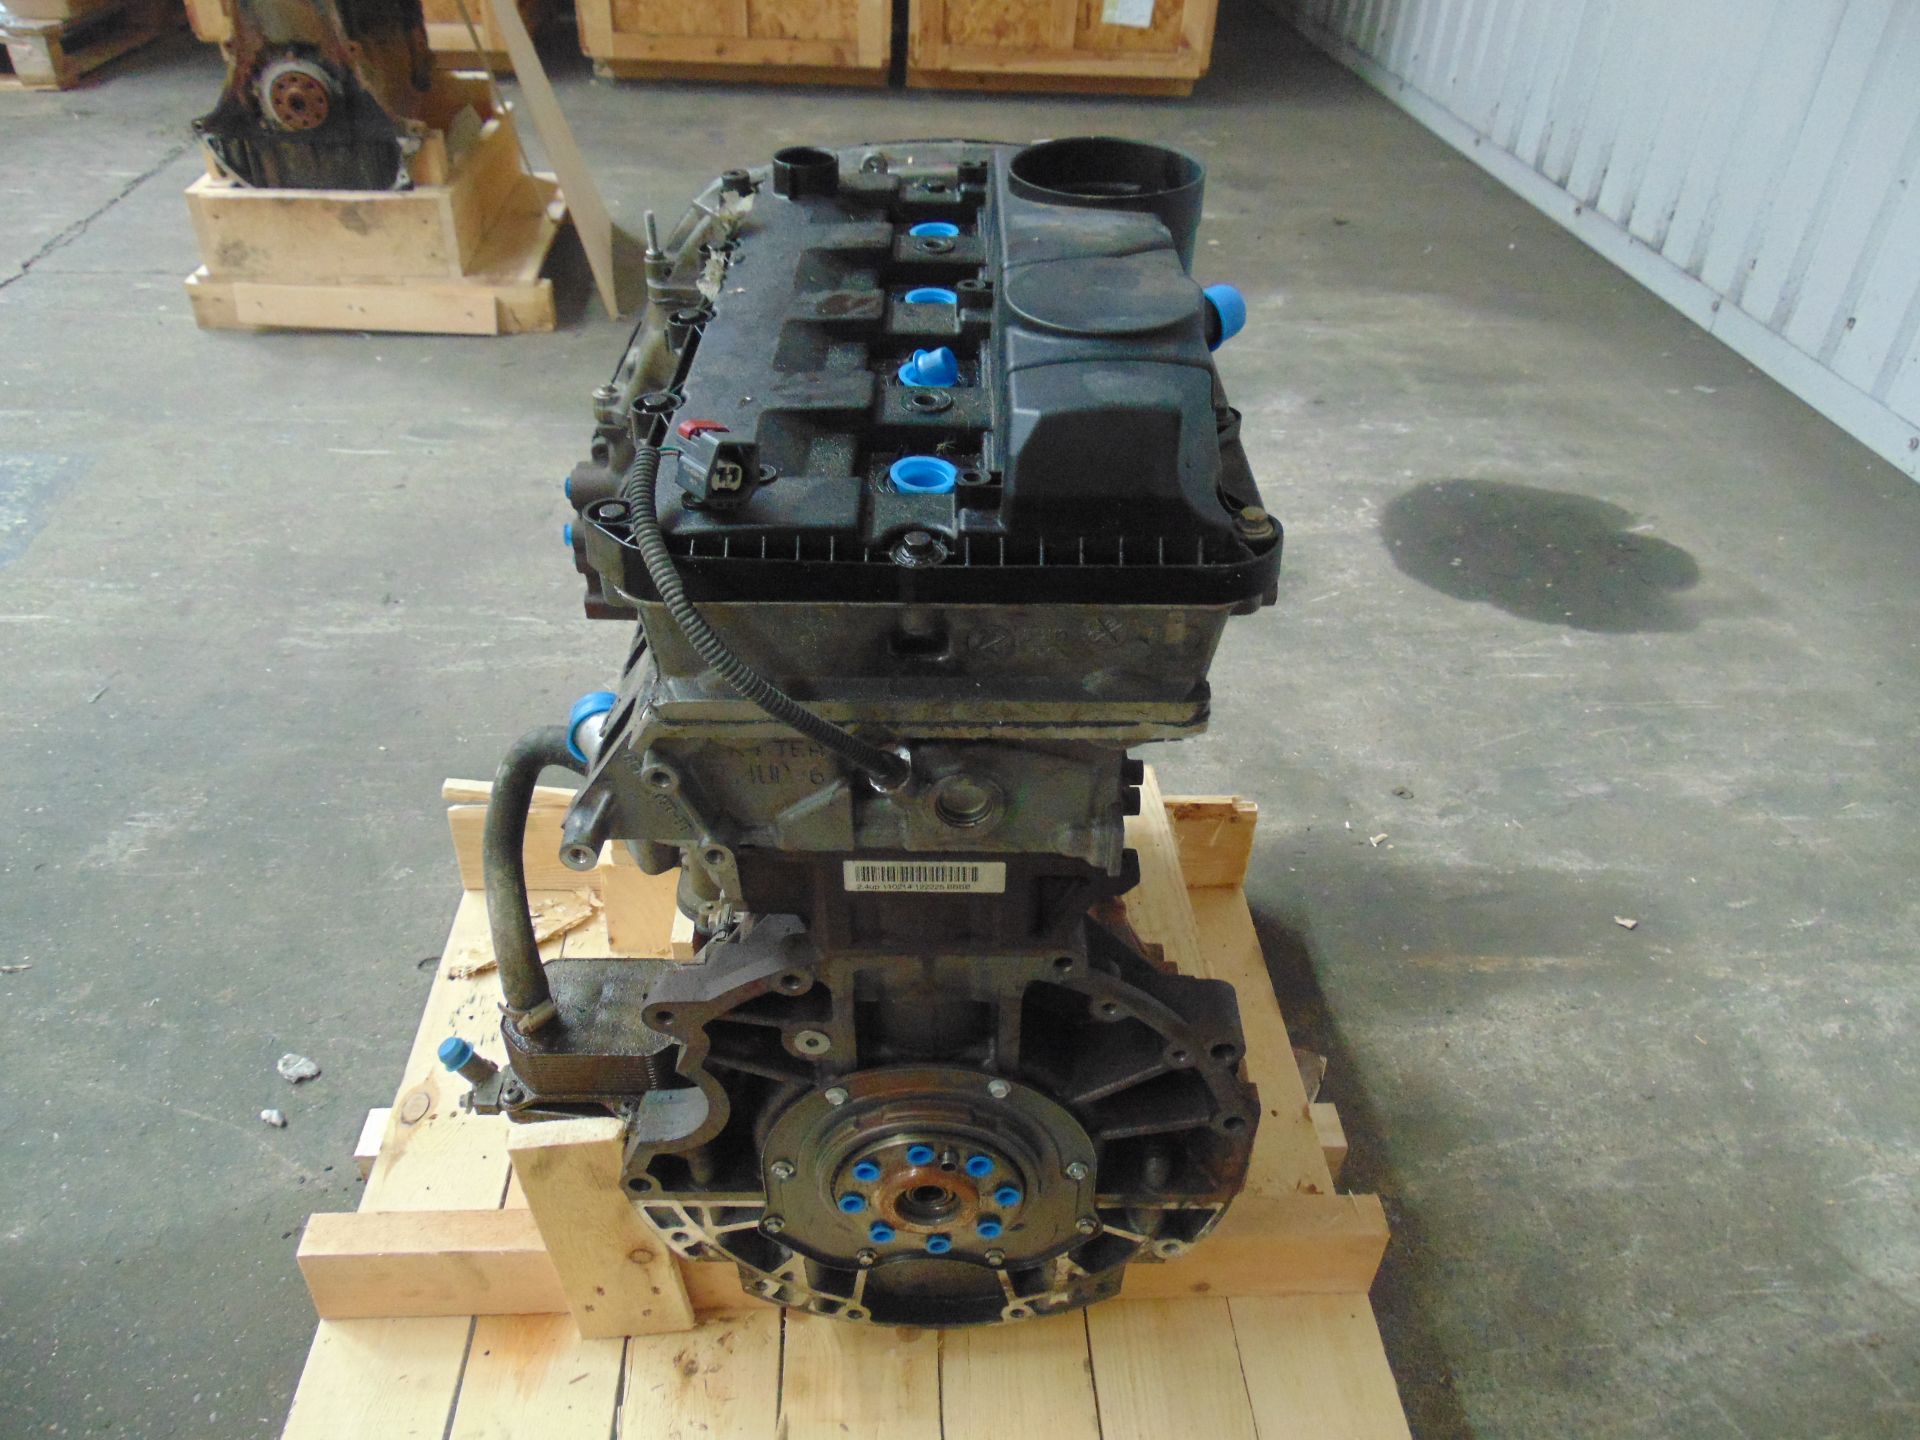 Land Rover 2.4L Ford Puma Takeout Diesel Engine P/No LR016810 - Image 8 of 10